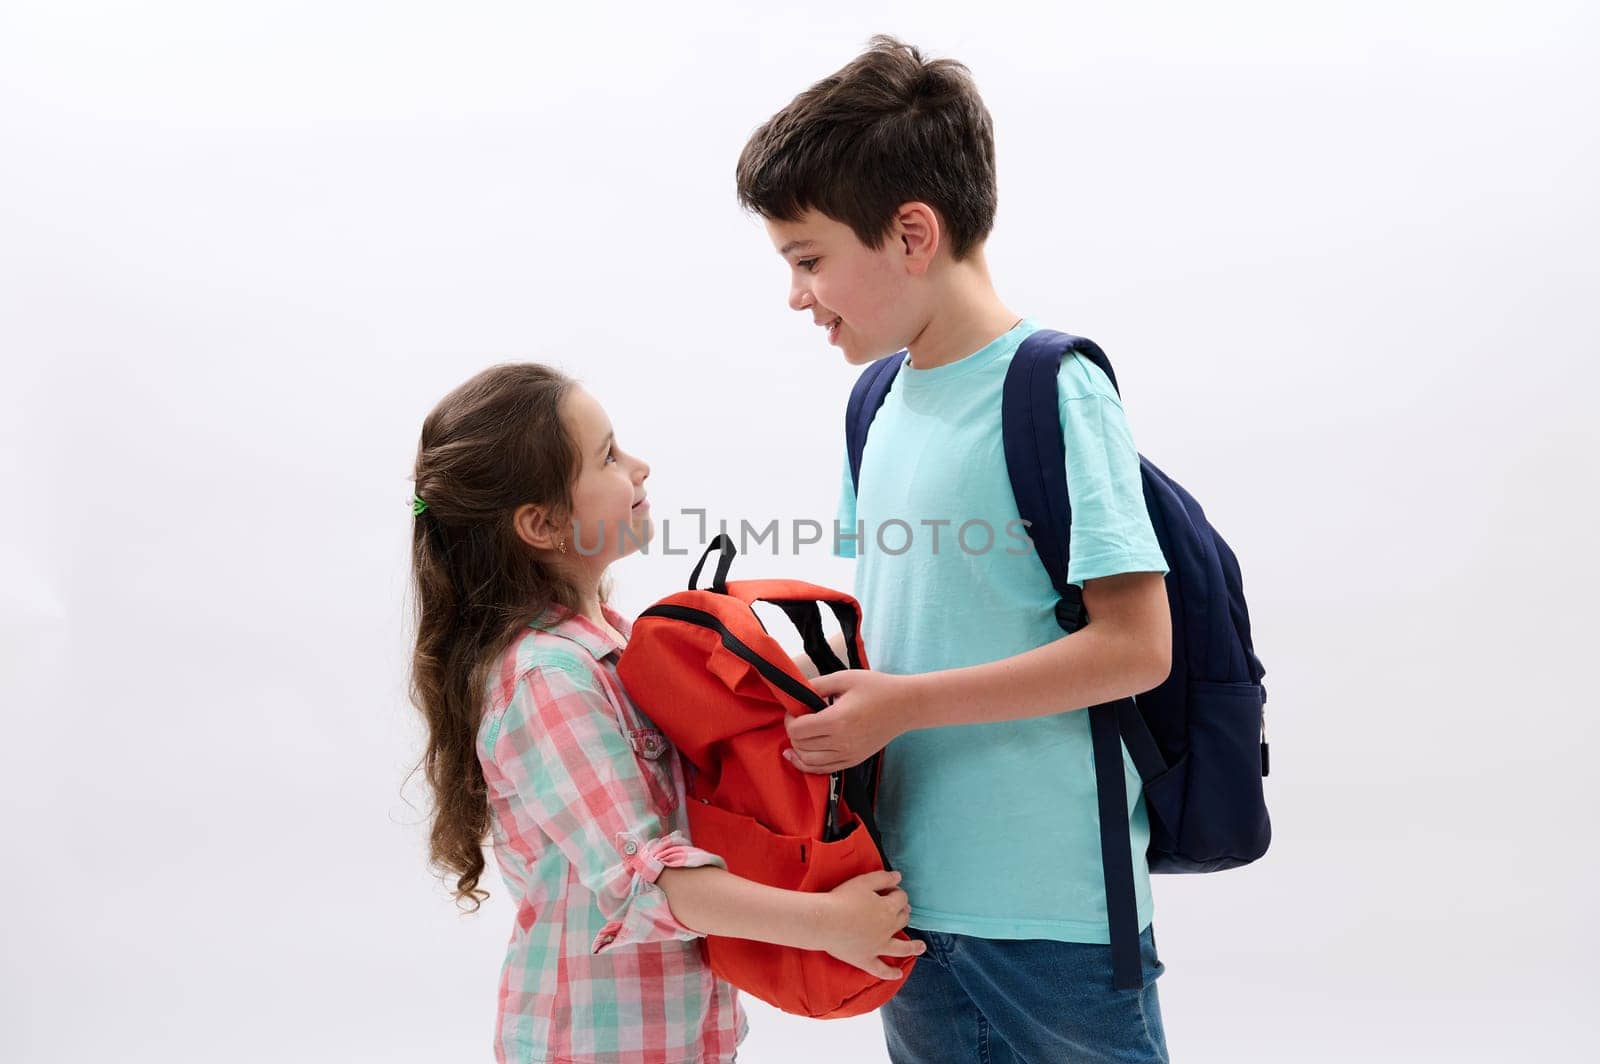 Happy children, preteen boy and girl with backpacks, smile looking at each other, isolated over white studio background by artgf